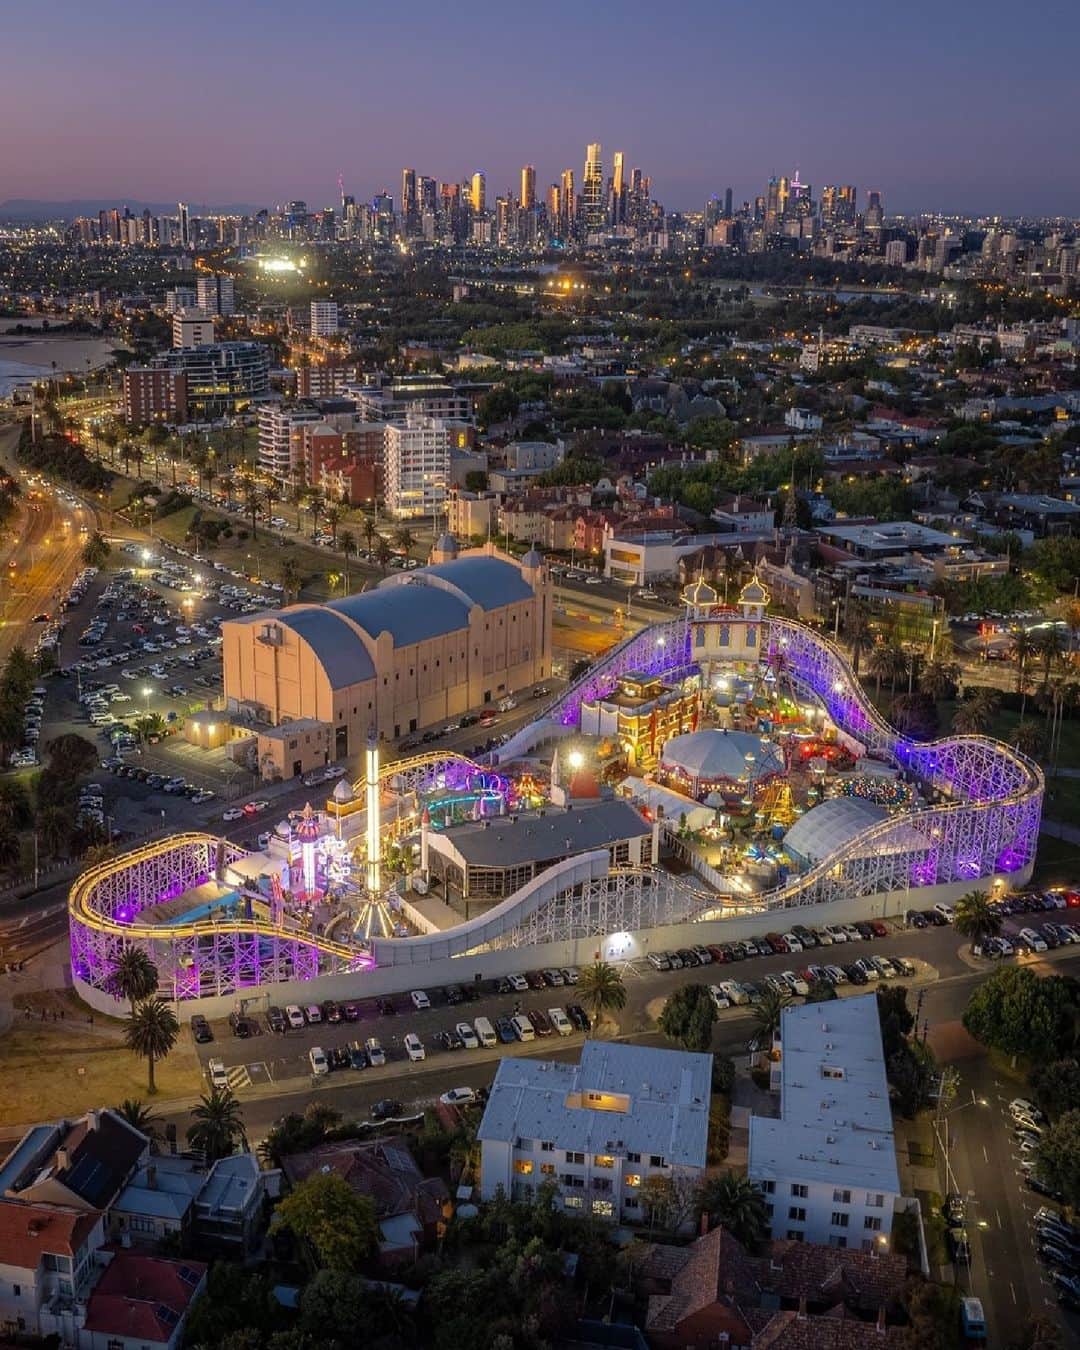 Australiaのインスタグラム：「Just #Melbourne's icons posing for a quick pic 😉📸 Kudos to our mate @a.j.wilko for sharing this stunning perspective of Narrm (@visitmelbourne), shot from above #StKilda's iconic @palaistheatre and @lunaparkmelb. You'll find this seaside suburb just 20 minutes from the city centre. Once here, soak up the carnival atmosphere and jump aboard #LunaPark's Great Scenic Railway for jaw-dropping views of the city and #PortPhillipBay.   #SeeAustralia #ComeAndSayGday #VisitVictoria #VisitMelbourne  ID: A nighttime aerial view captured from above showcases a brightly illuminated theme park and its surrounding suburb. The park's lights create a vibrant glow, while in the distance, a city skyline can be seen.」